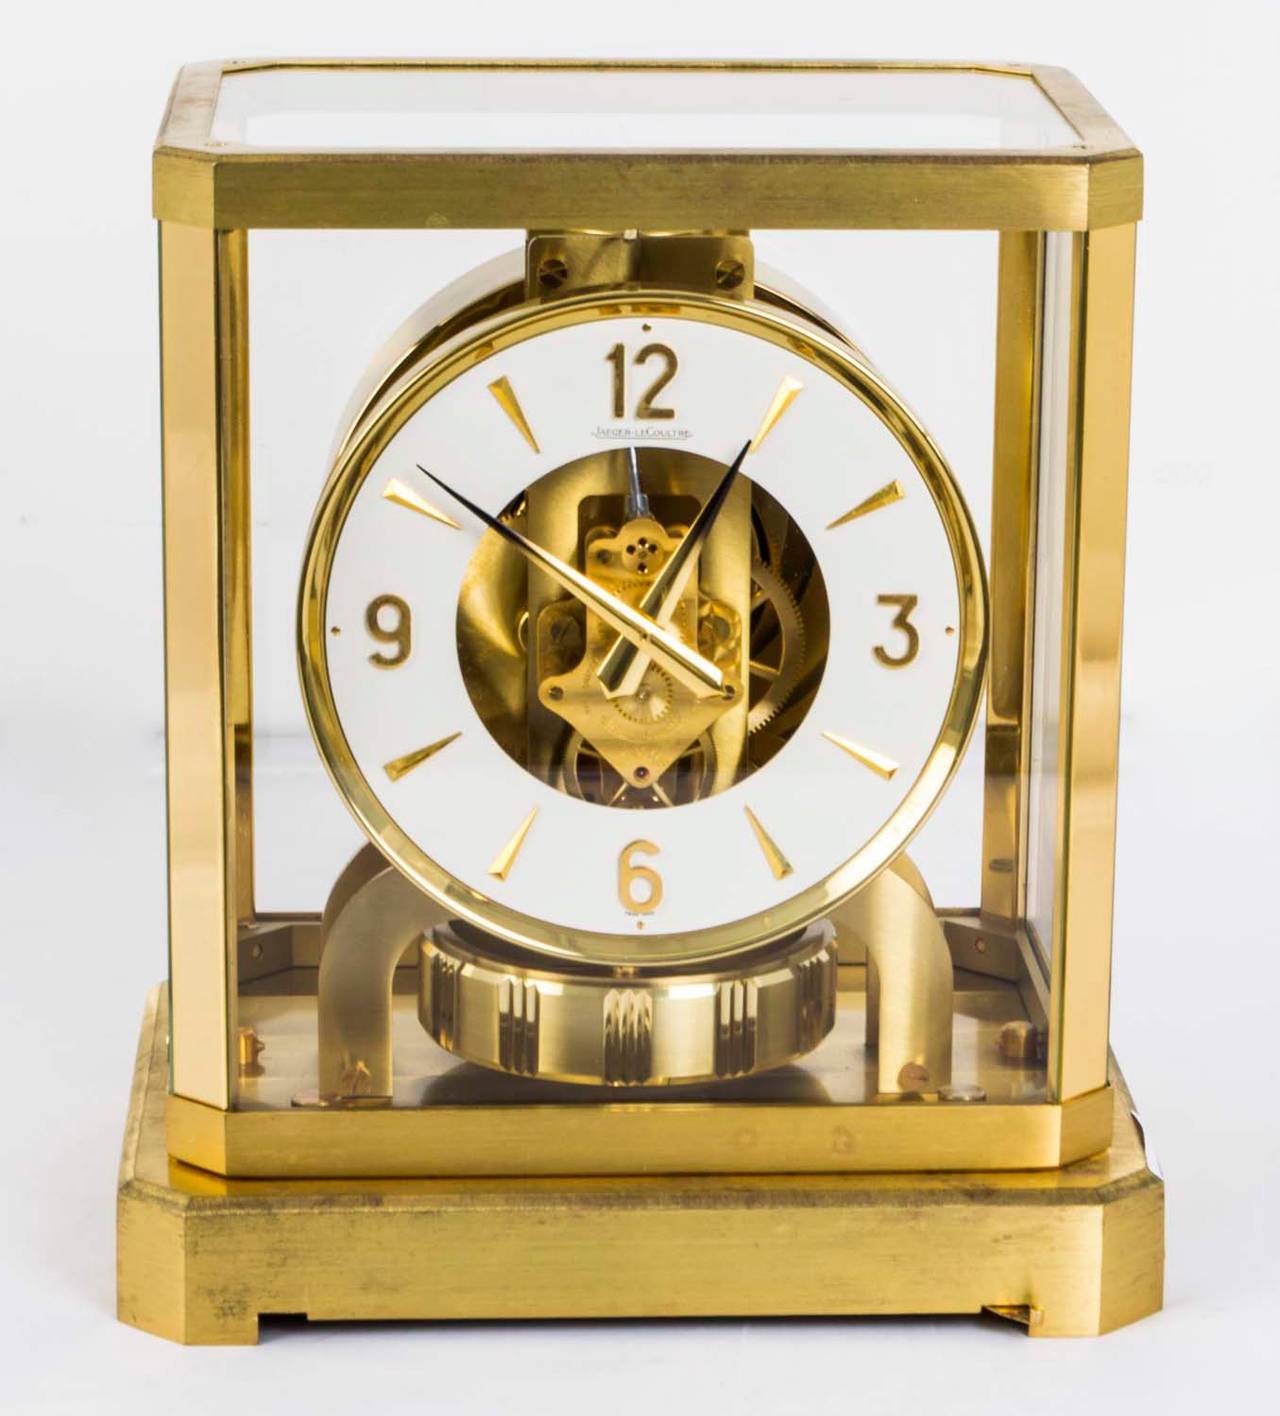 This is beautiful and very decorative Vintage Atmos mantle clock by Jaeger-LeCoultre. 

The clock is displayed in a polished gilt rectangular brass case and the glass door still has the bold LeCoultre etching. 

The clock self-winds and keeps